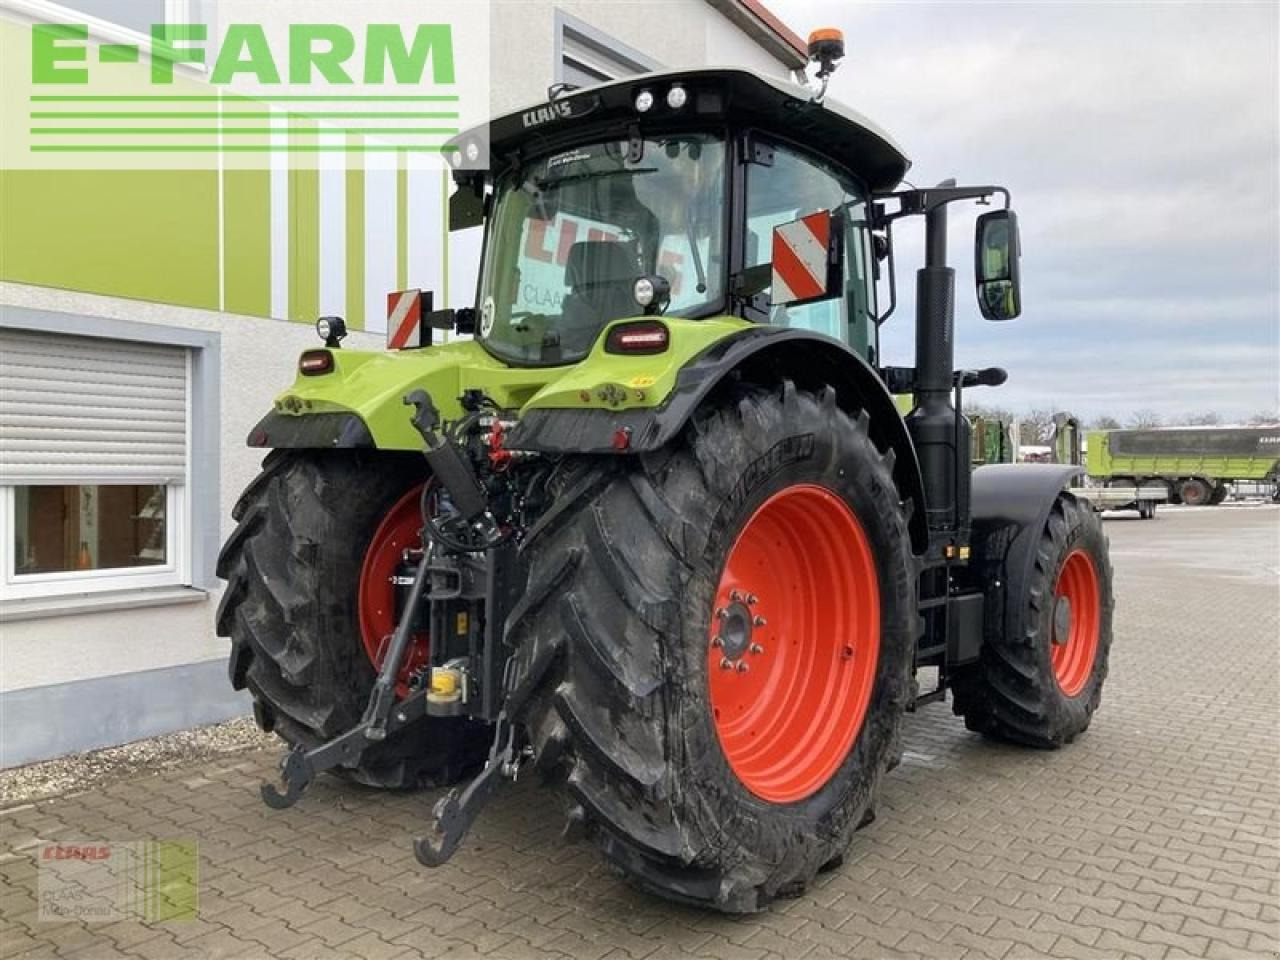 Tractor CLAAS arion 660 cmatic - st v first